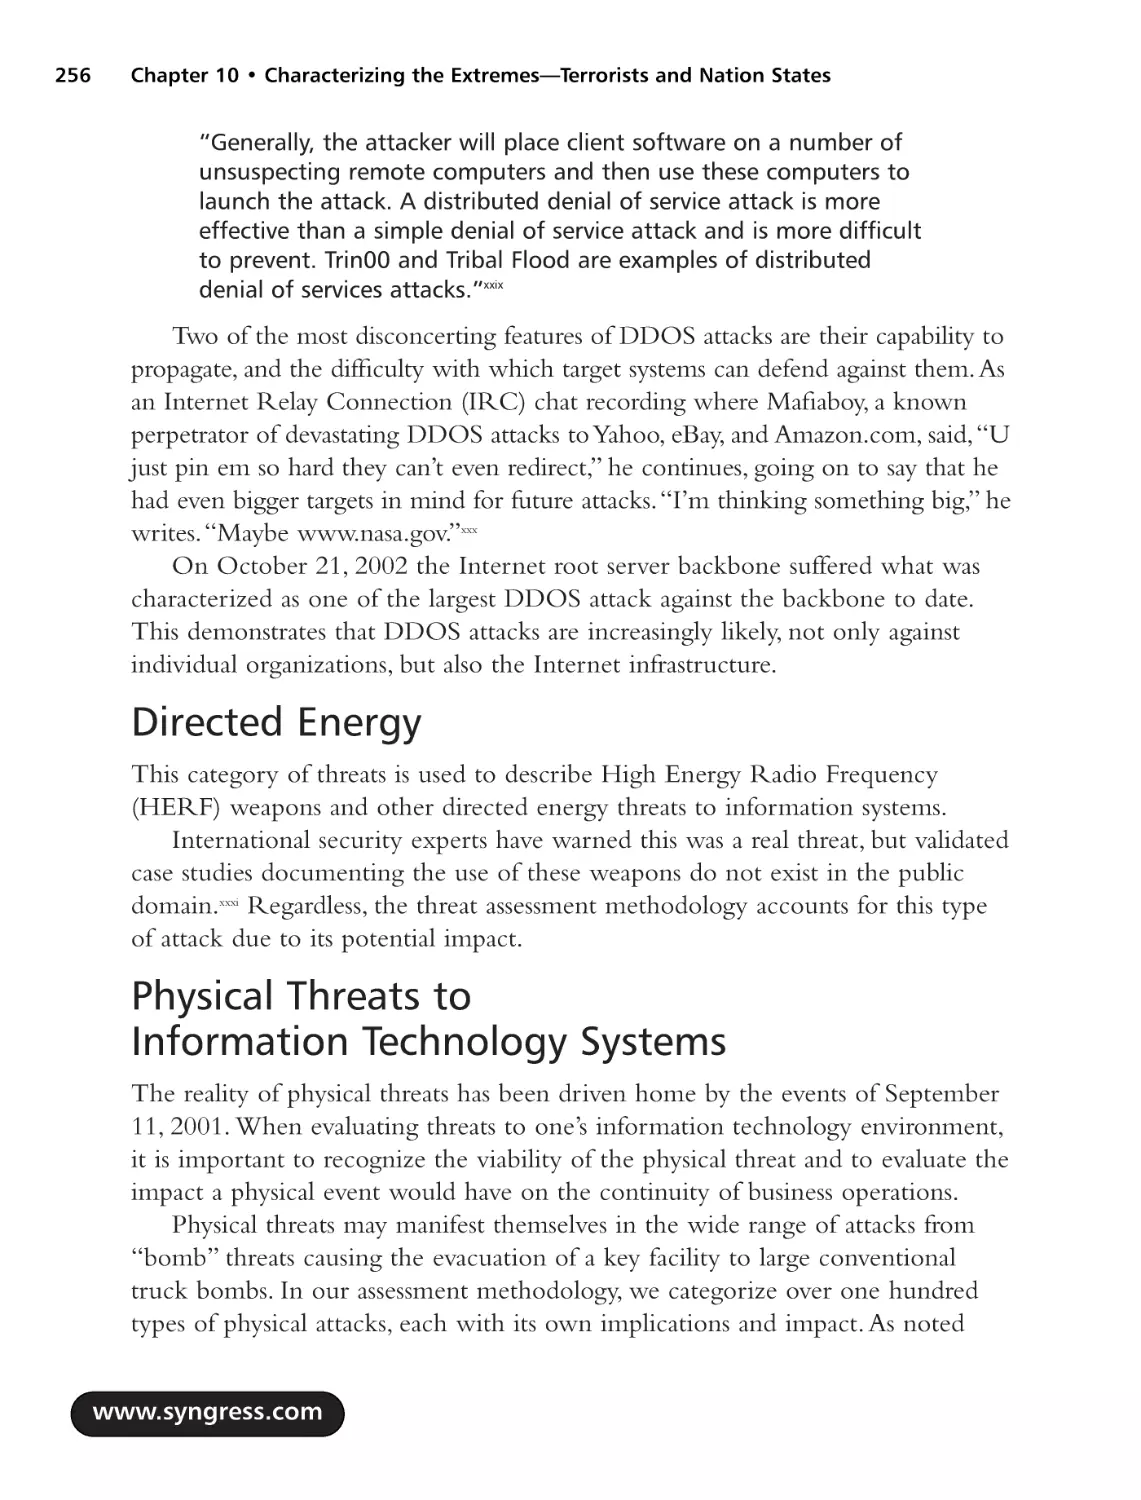 Directed Energy
Physical Threats to Information Technology Systems